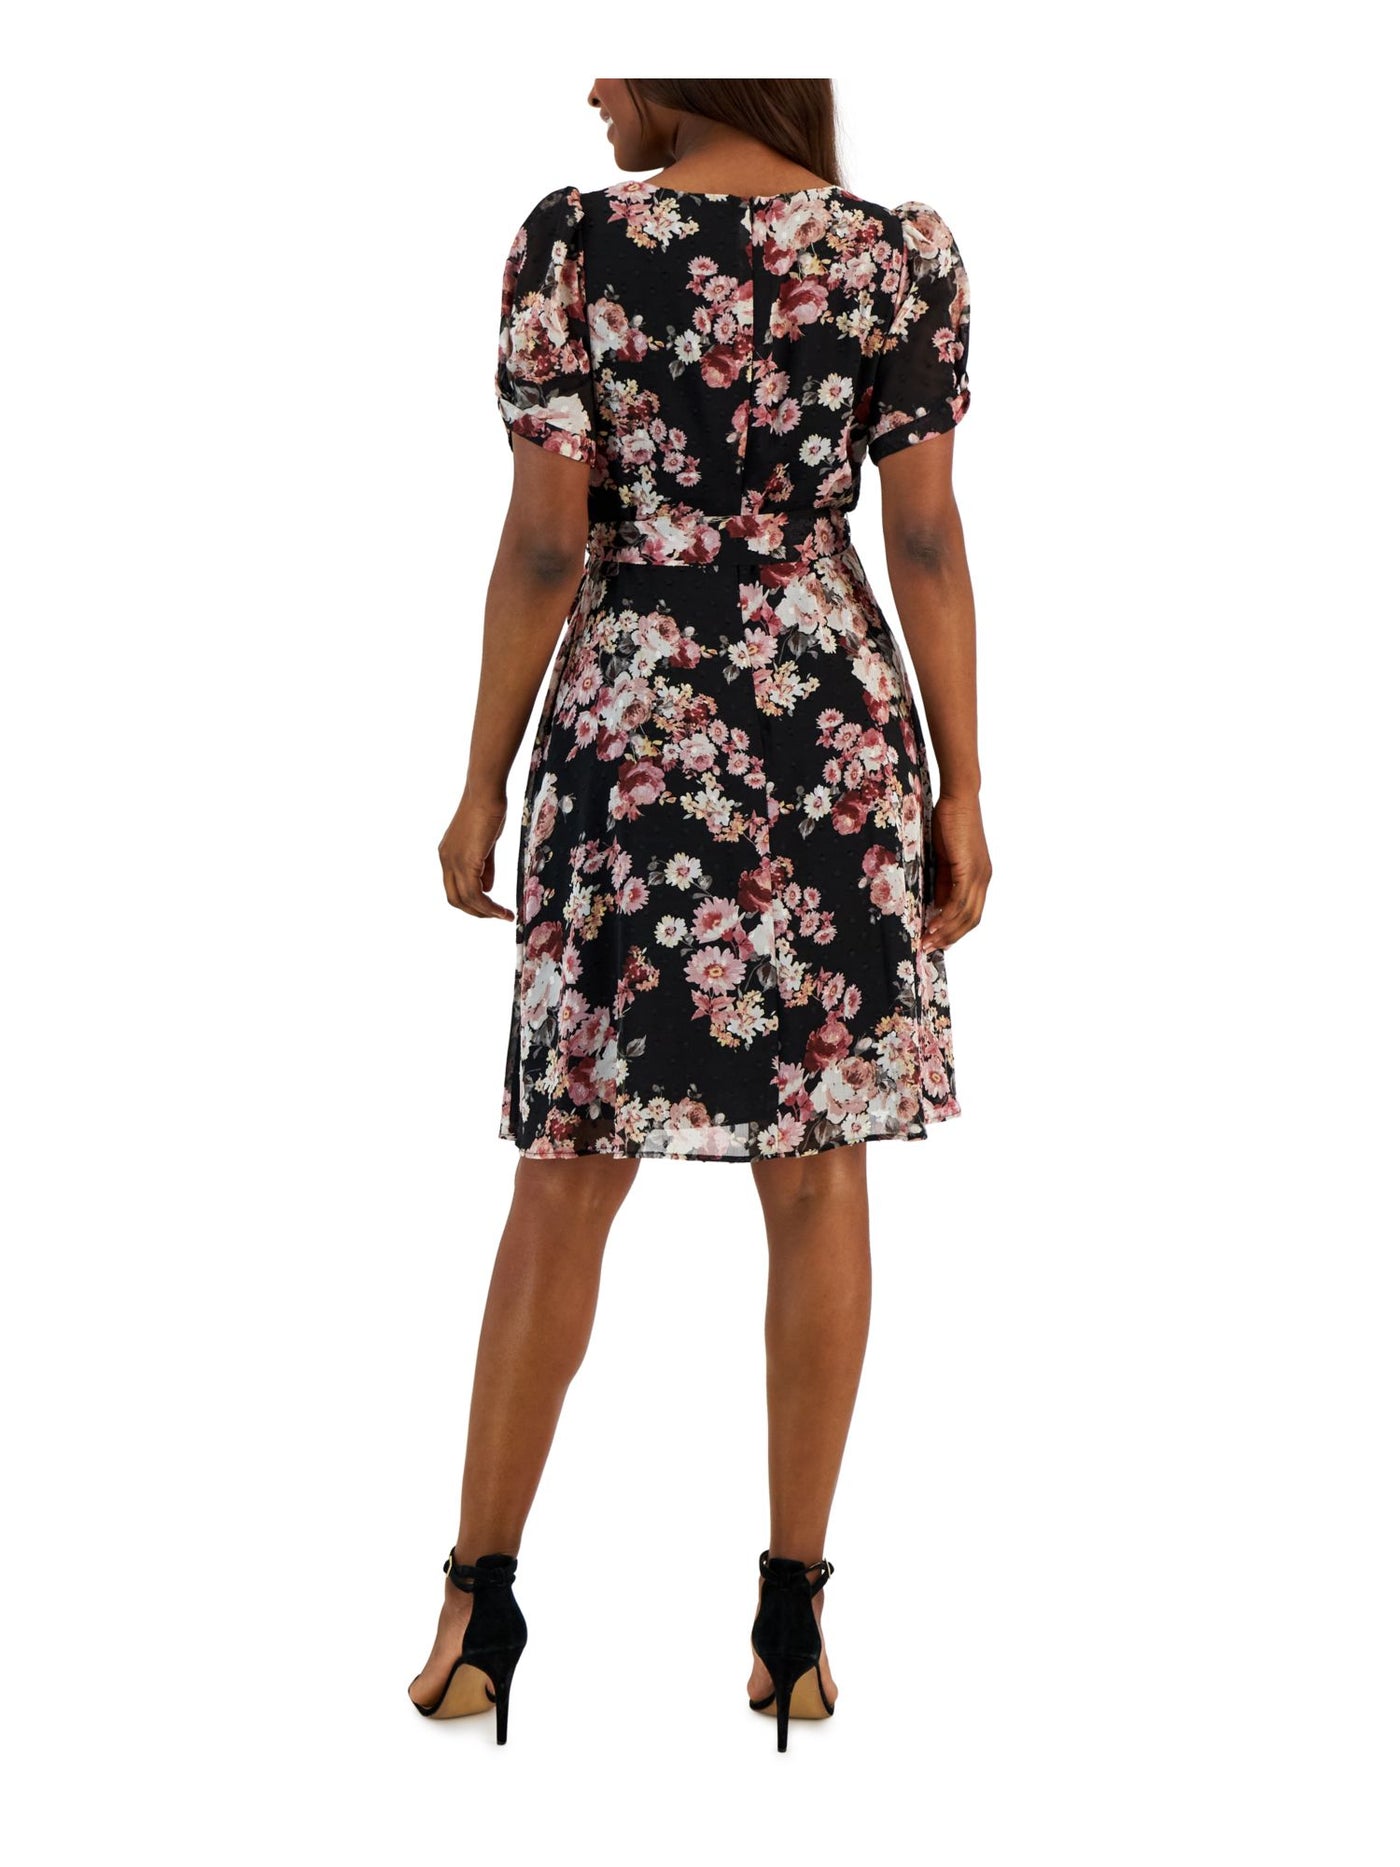 CONNECTED APPAREL Womens Black Zippered Lined Sheer Tie Belt Floral Short Sleeve Surplice Neckline Above The Knee Fit + Flare Dress 4